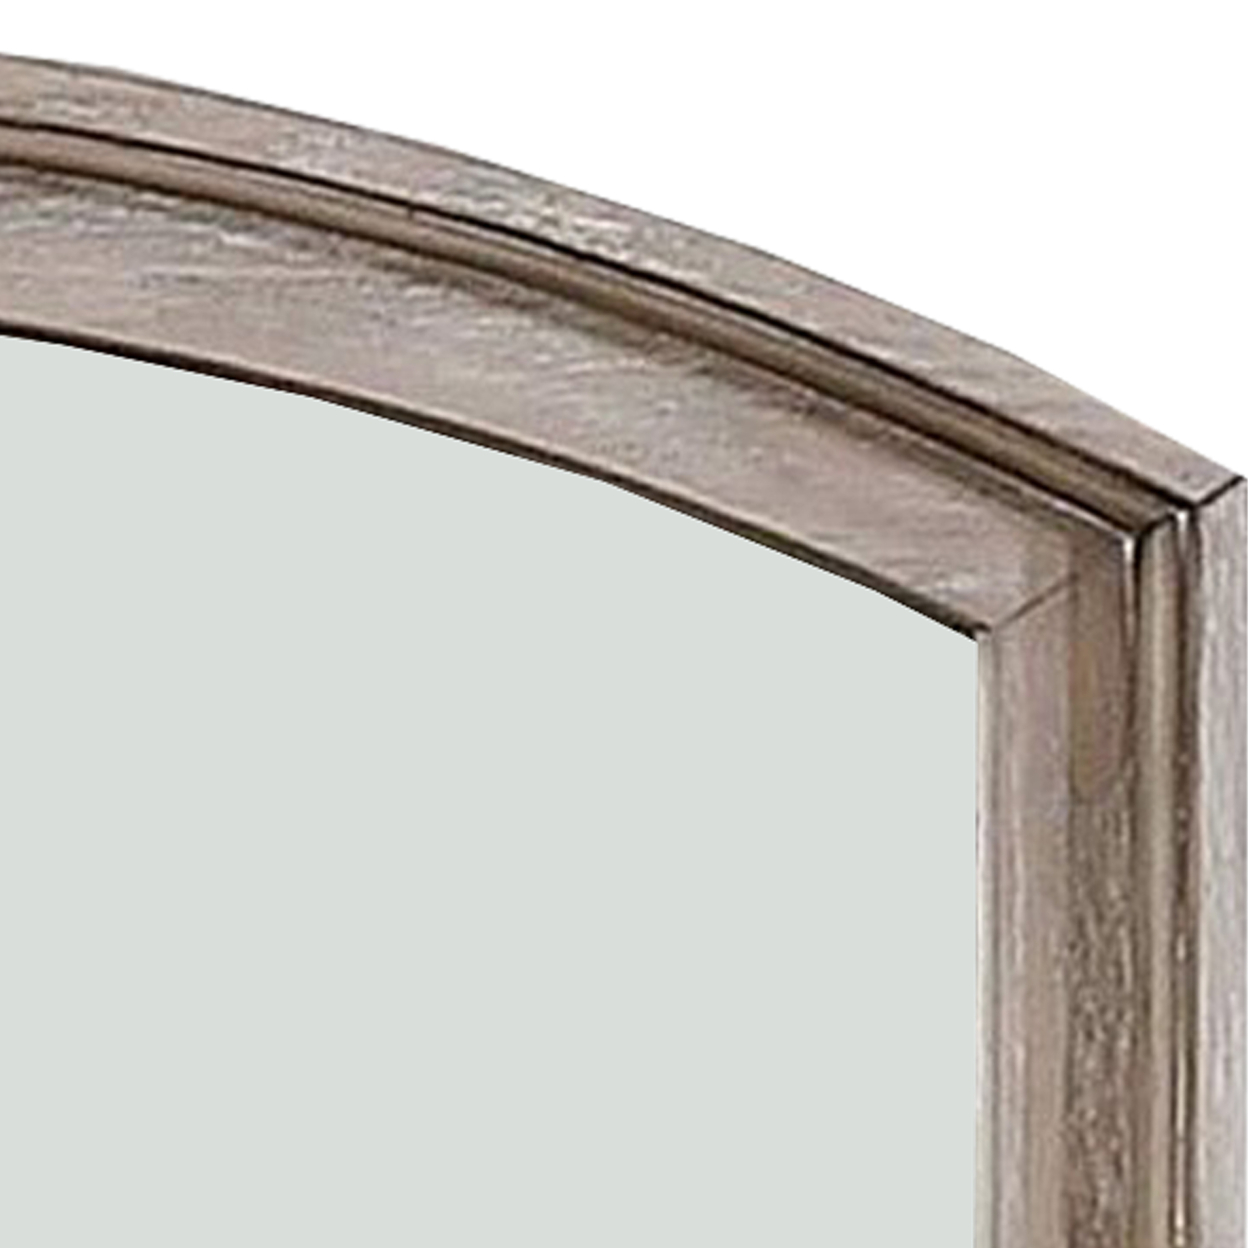 Mirror With Curved Top Frame And Weathered Look, Gray- Saltoro Sherpi